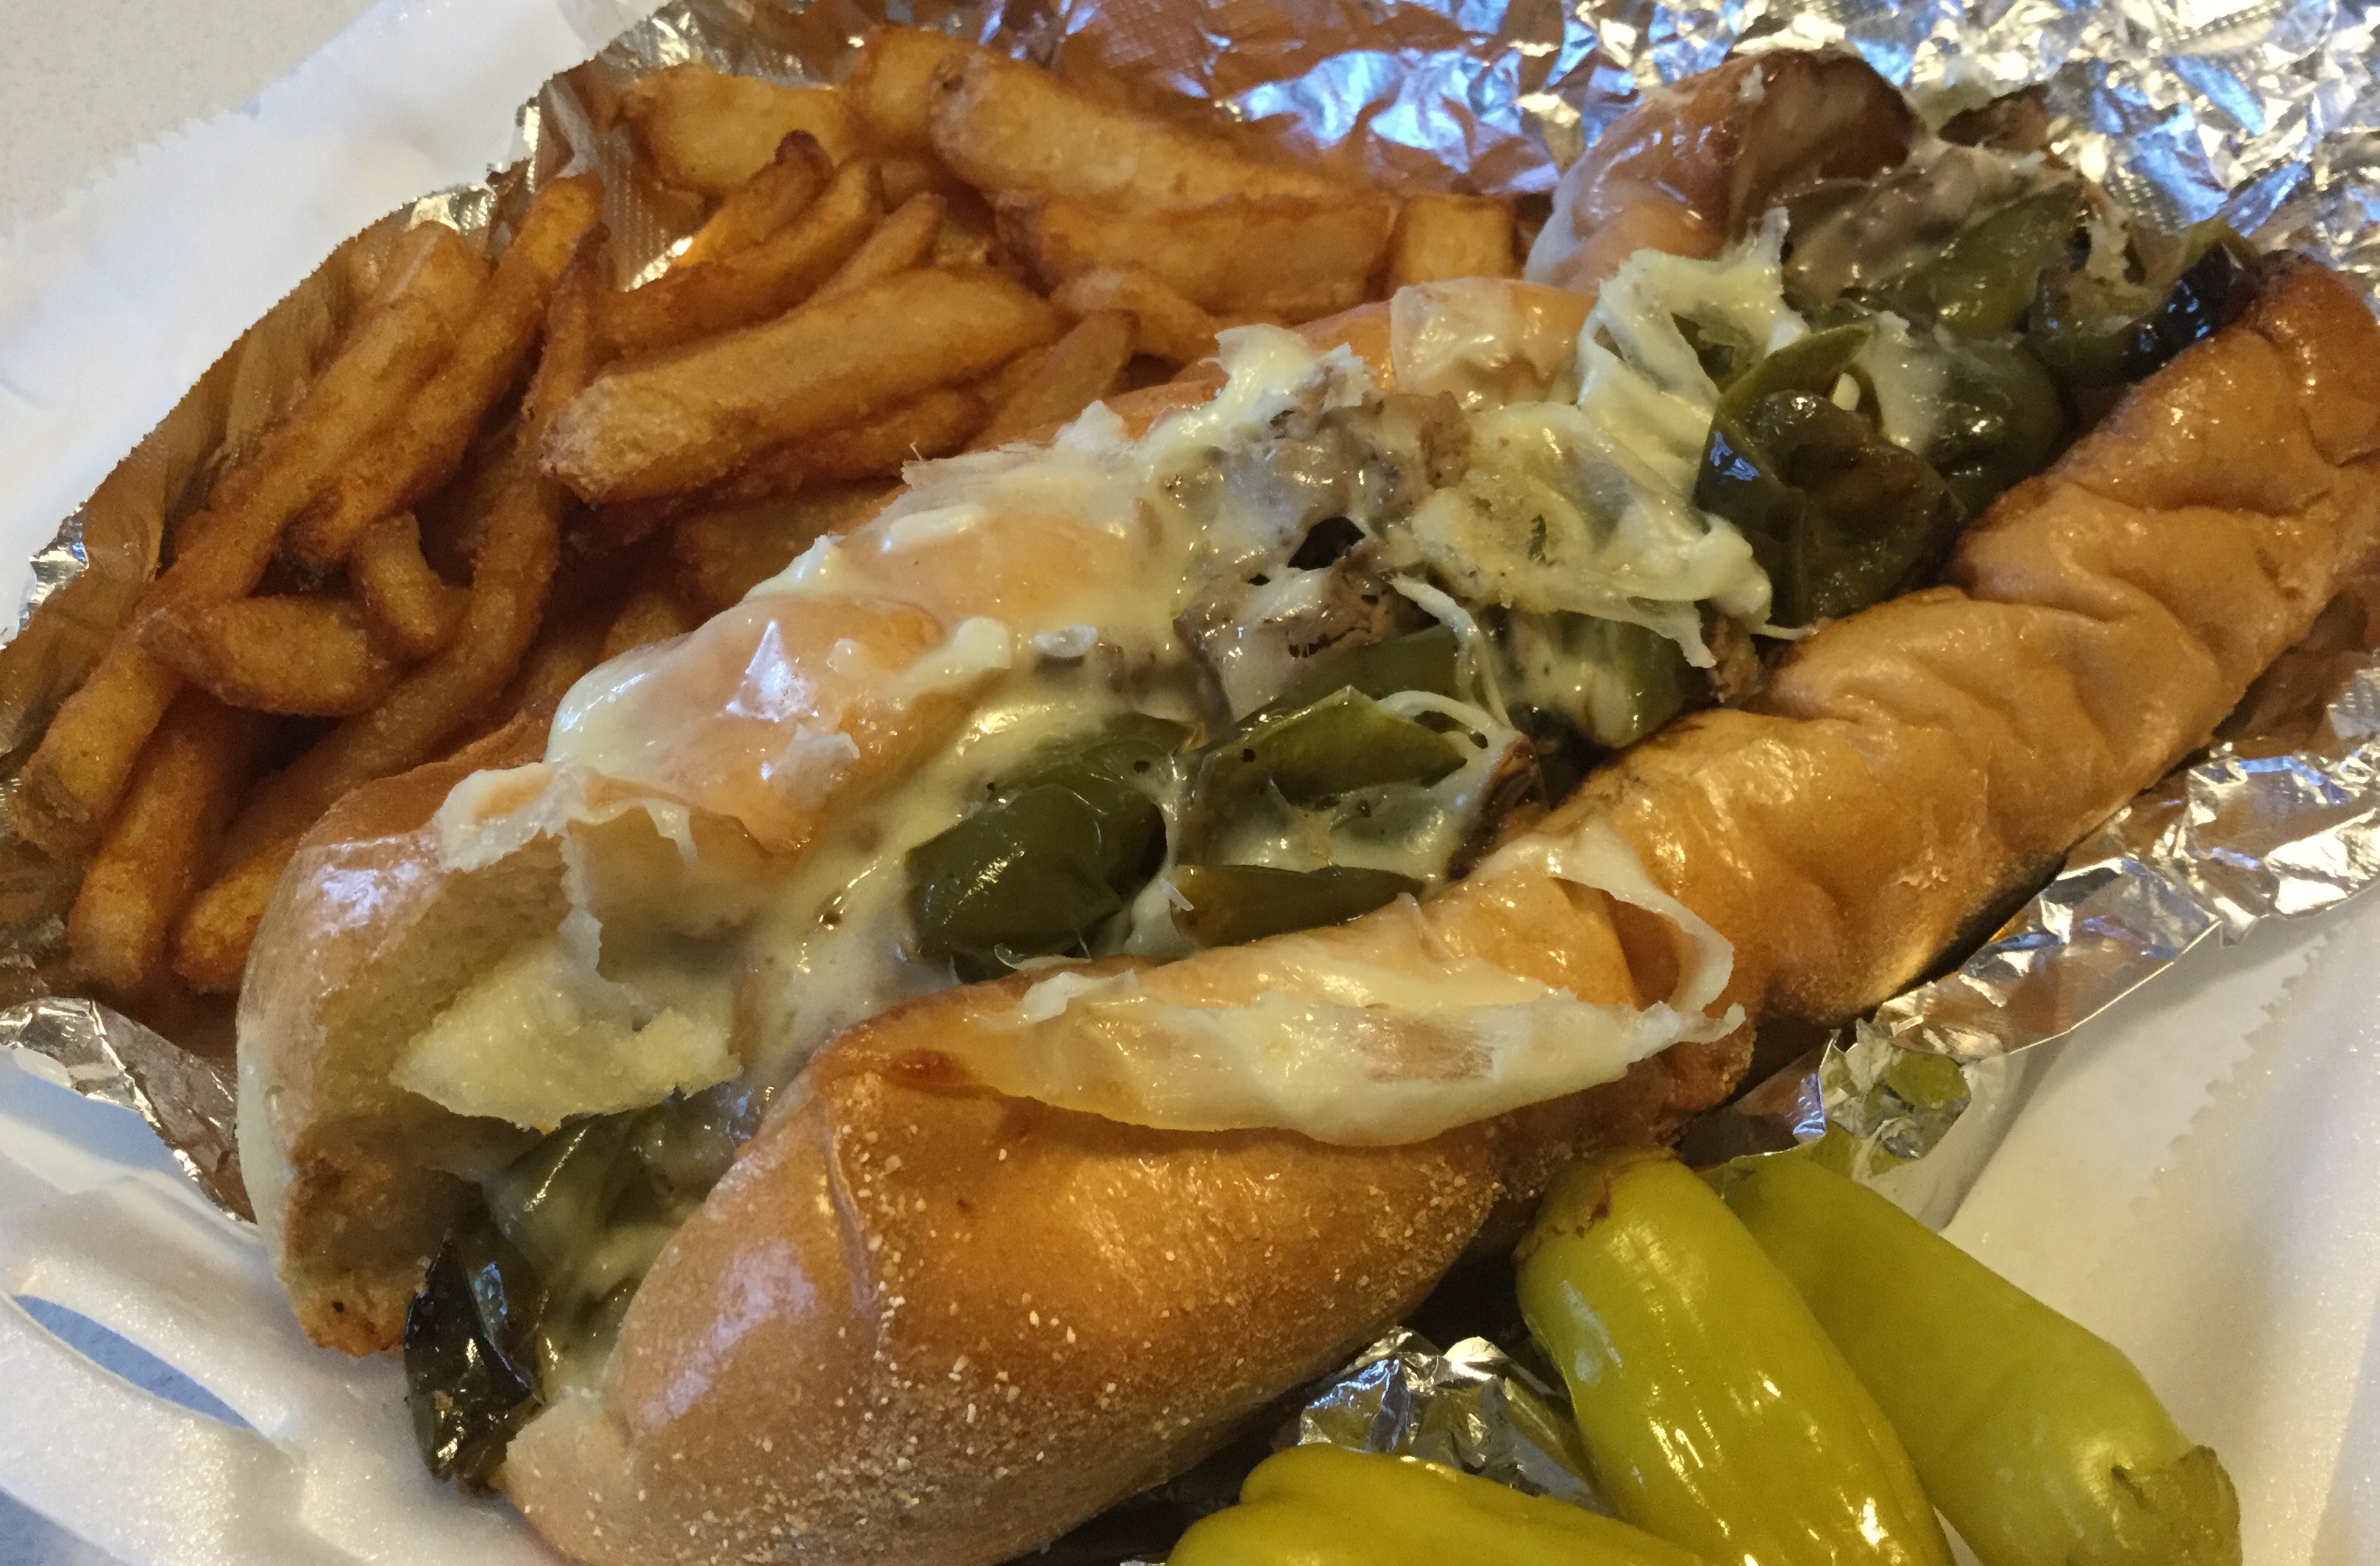 An italian beef sandwich sits on tin foil in a white styrofoam carryout container with fries above the sandwich and several banana peppers below it. Photo by Rachael McMillan.